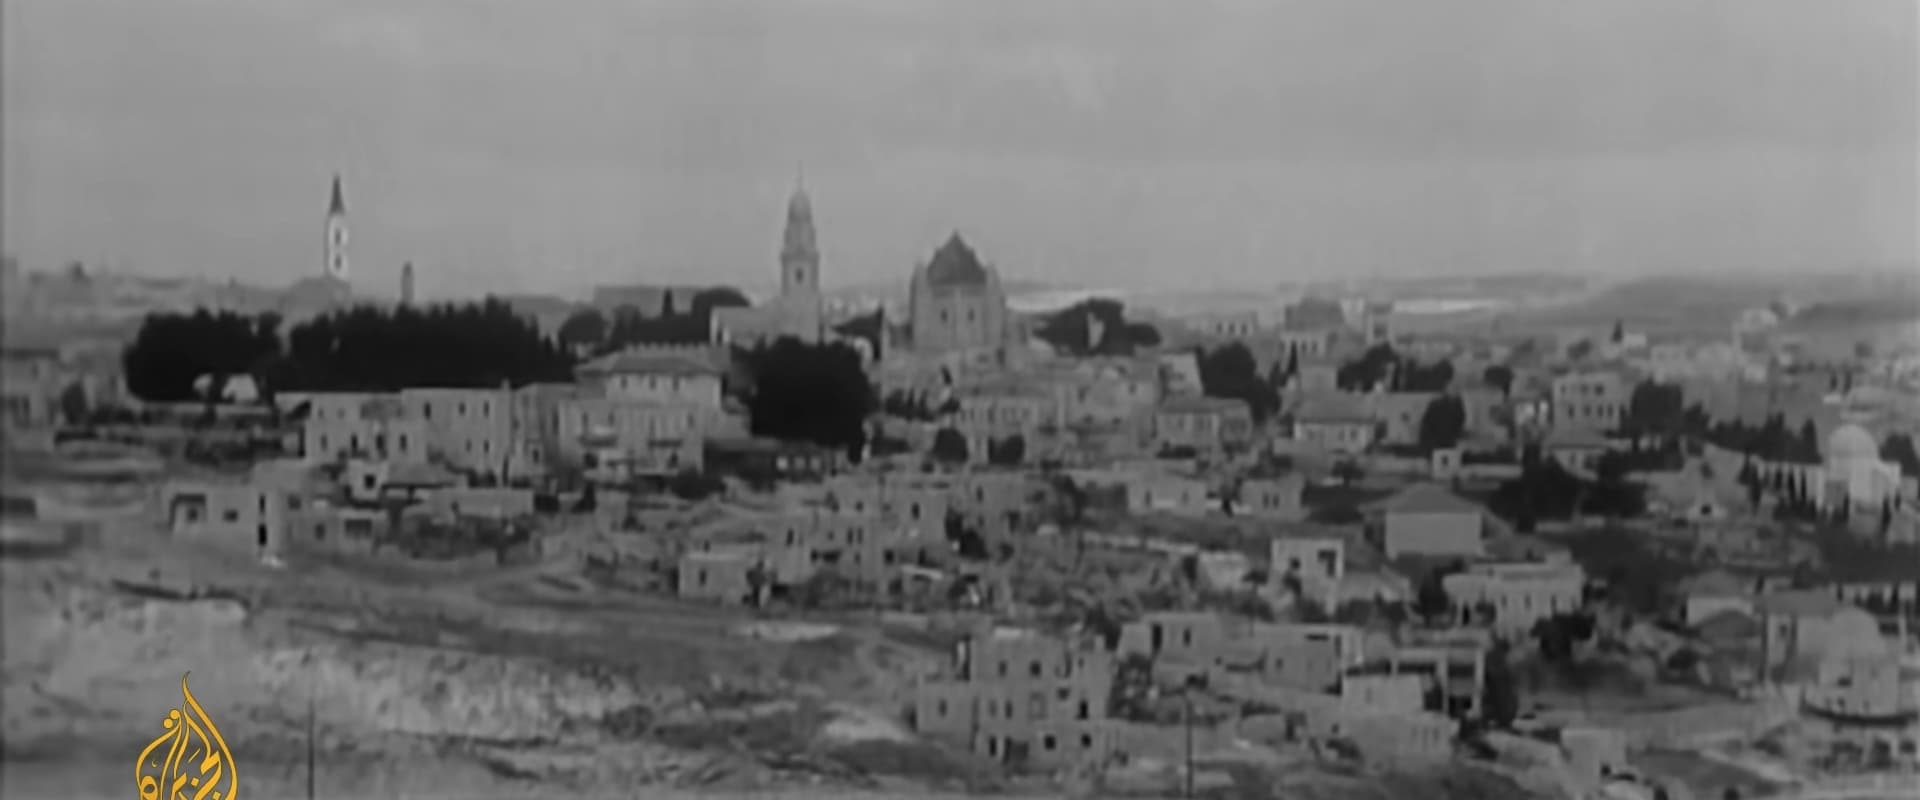 Palestine 1920: The Other Side of the Palestinian Story